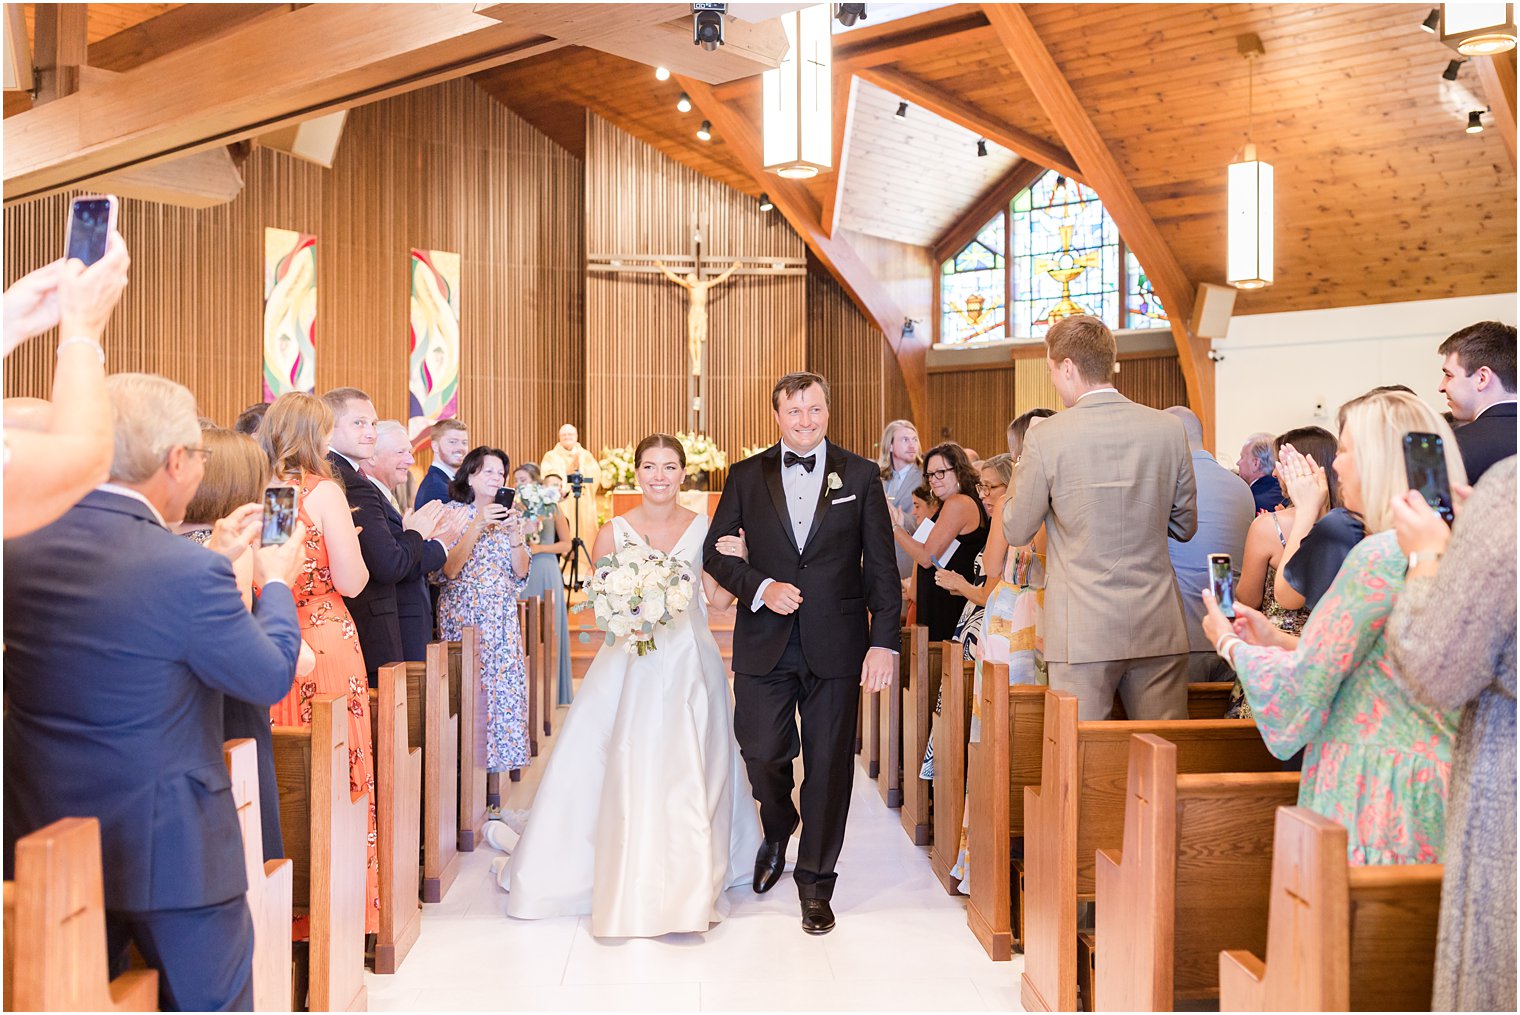 couple recesses up aisle after traditional wedding ceremony at the Church of the Presentation